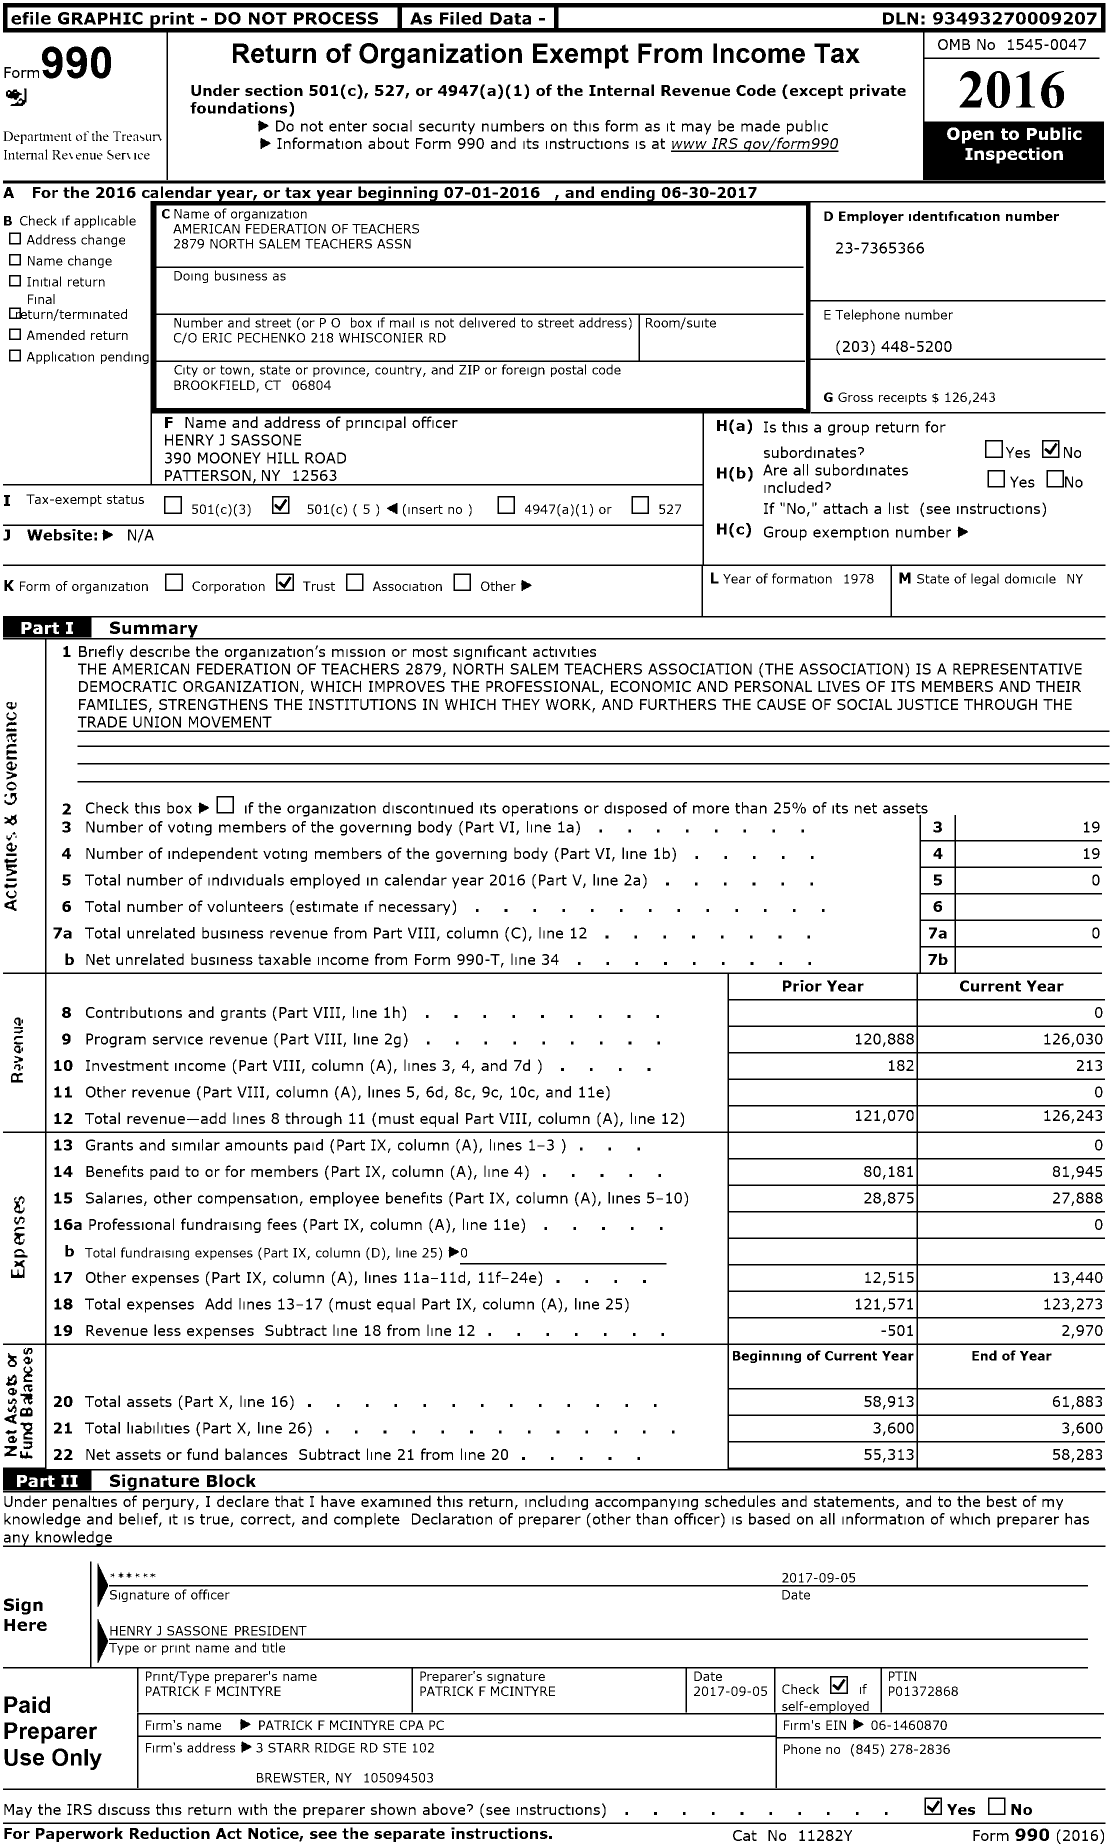 Image of first page of 2016 Form 990O for American Federation of Teachers 2879 North Salem Teachers Association